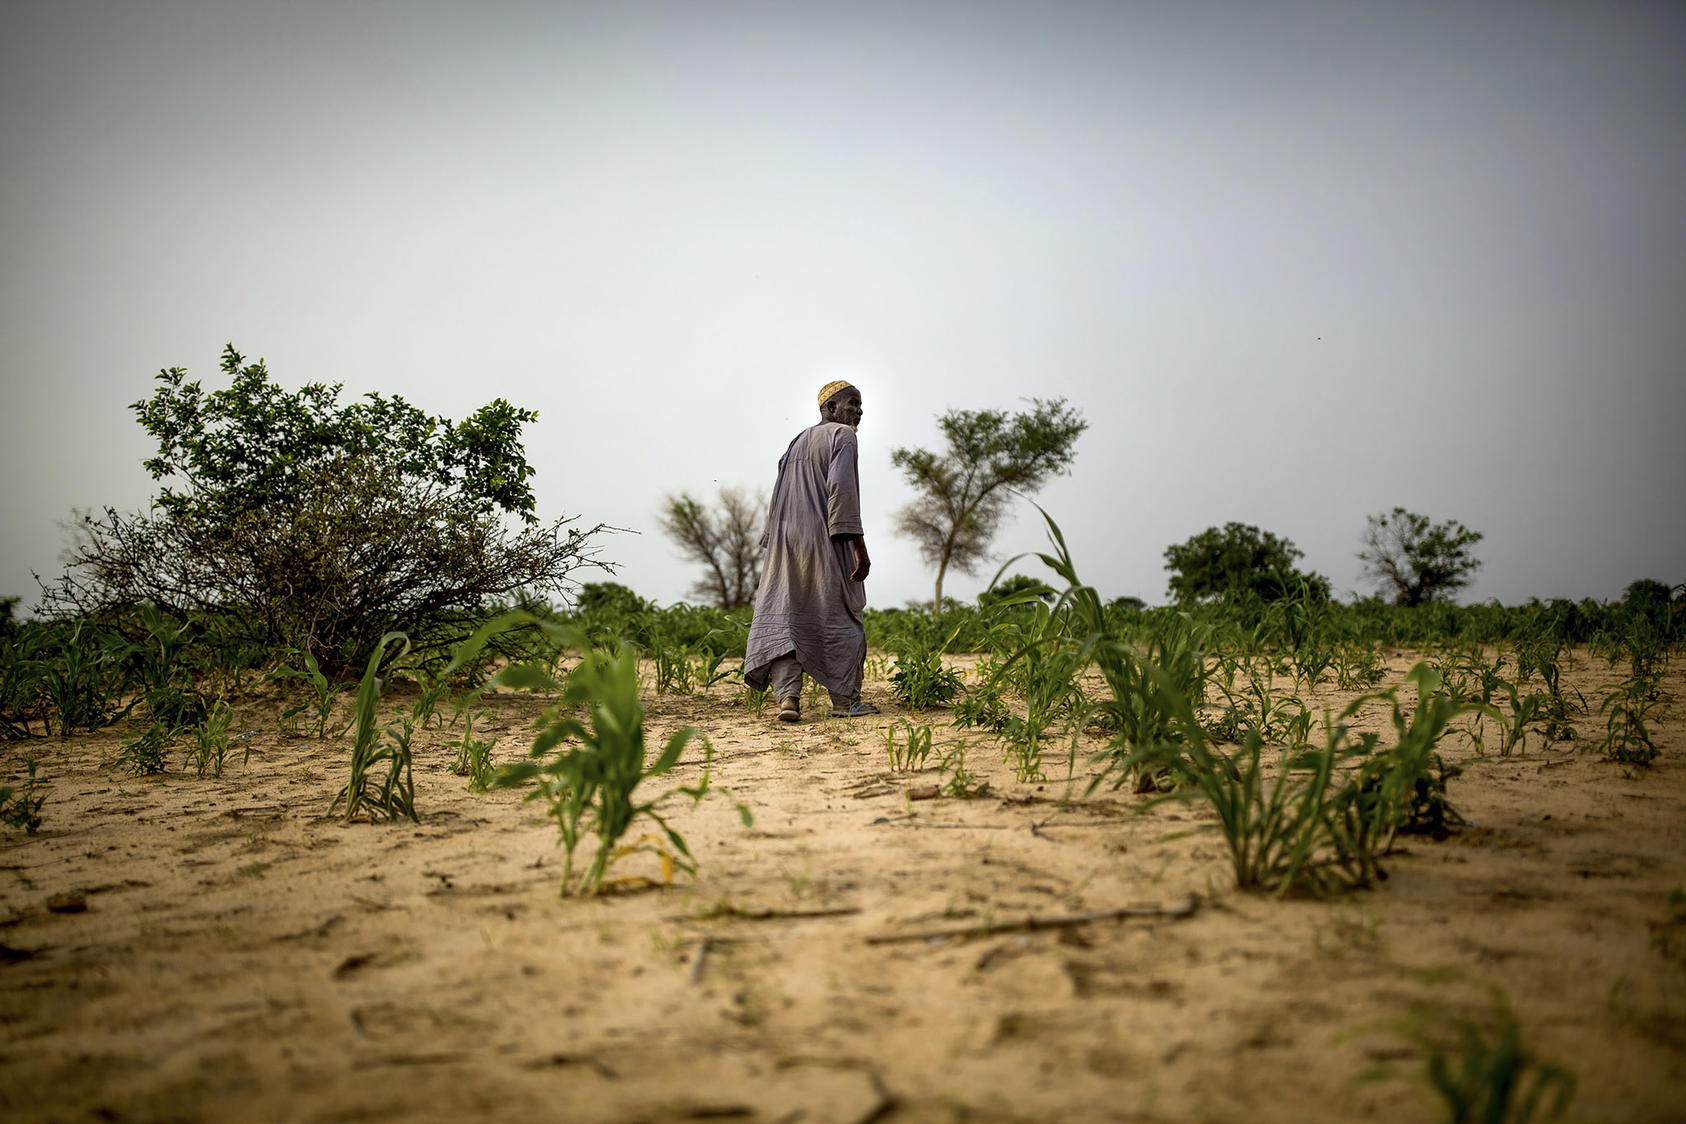 Adou Issa, a farmer, surveys his stunted crops in Toudoun Agoua, a village in Niger’s Zinder region, Aug. 13, 2016. Most of those fleeing sub-Saharan Africa do so due to climate change. (Josh Haner/The New York Times)